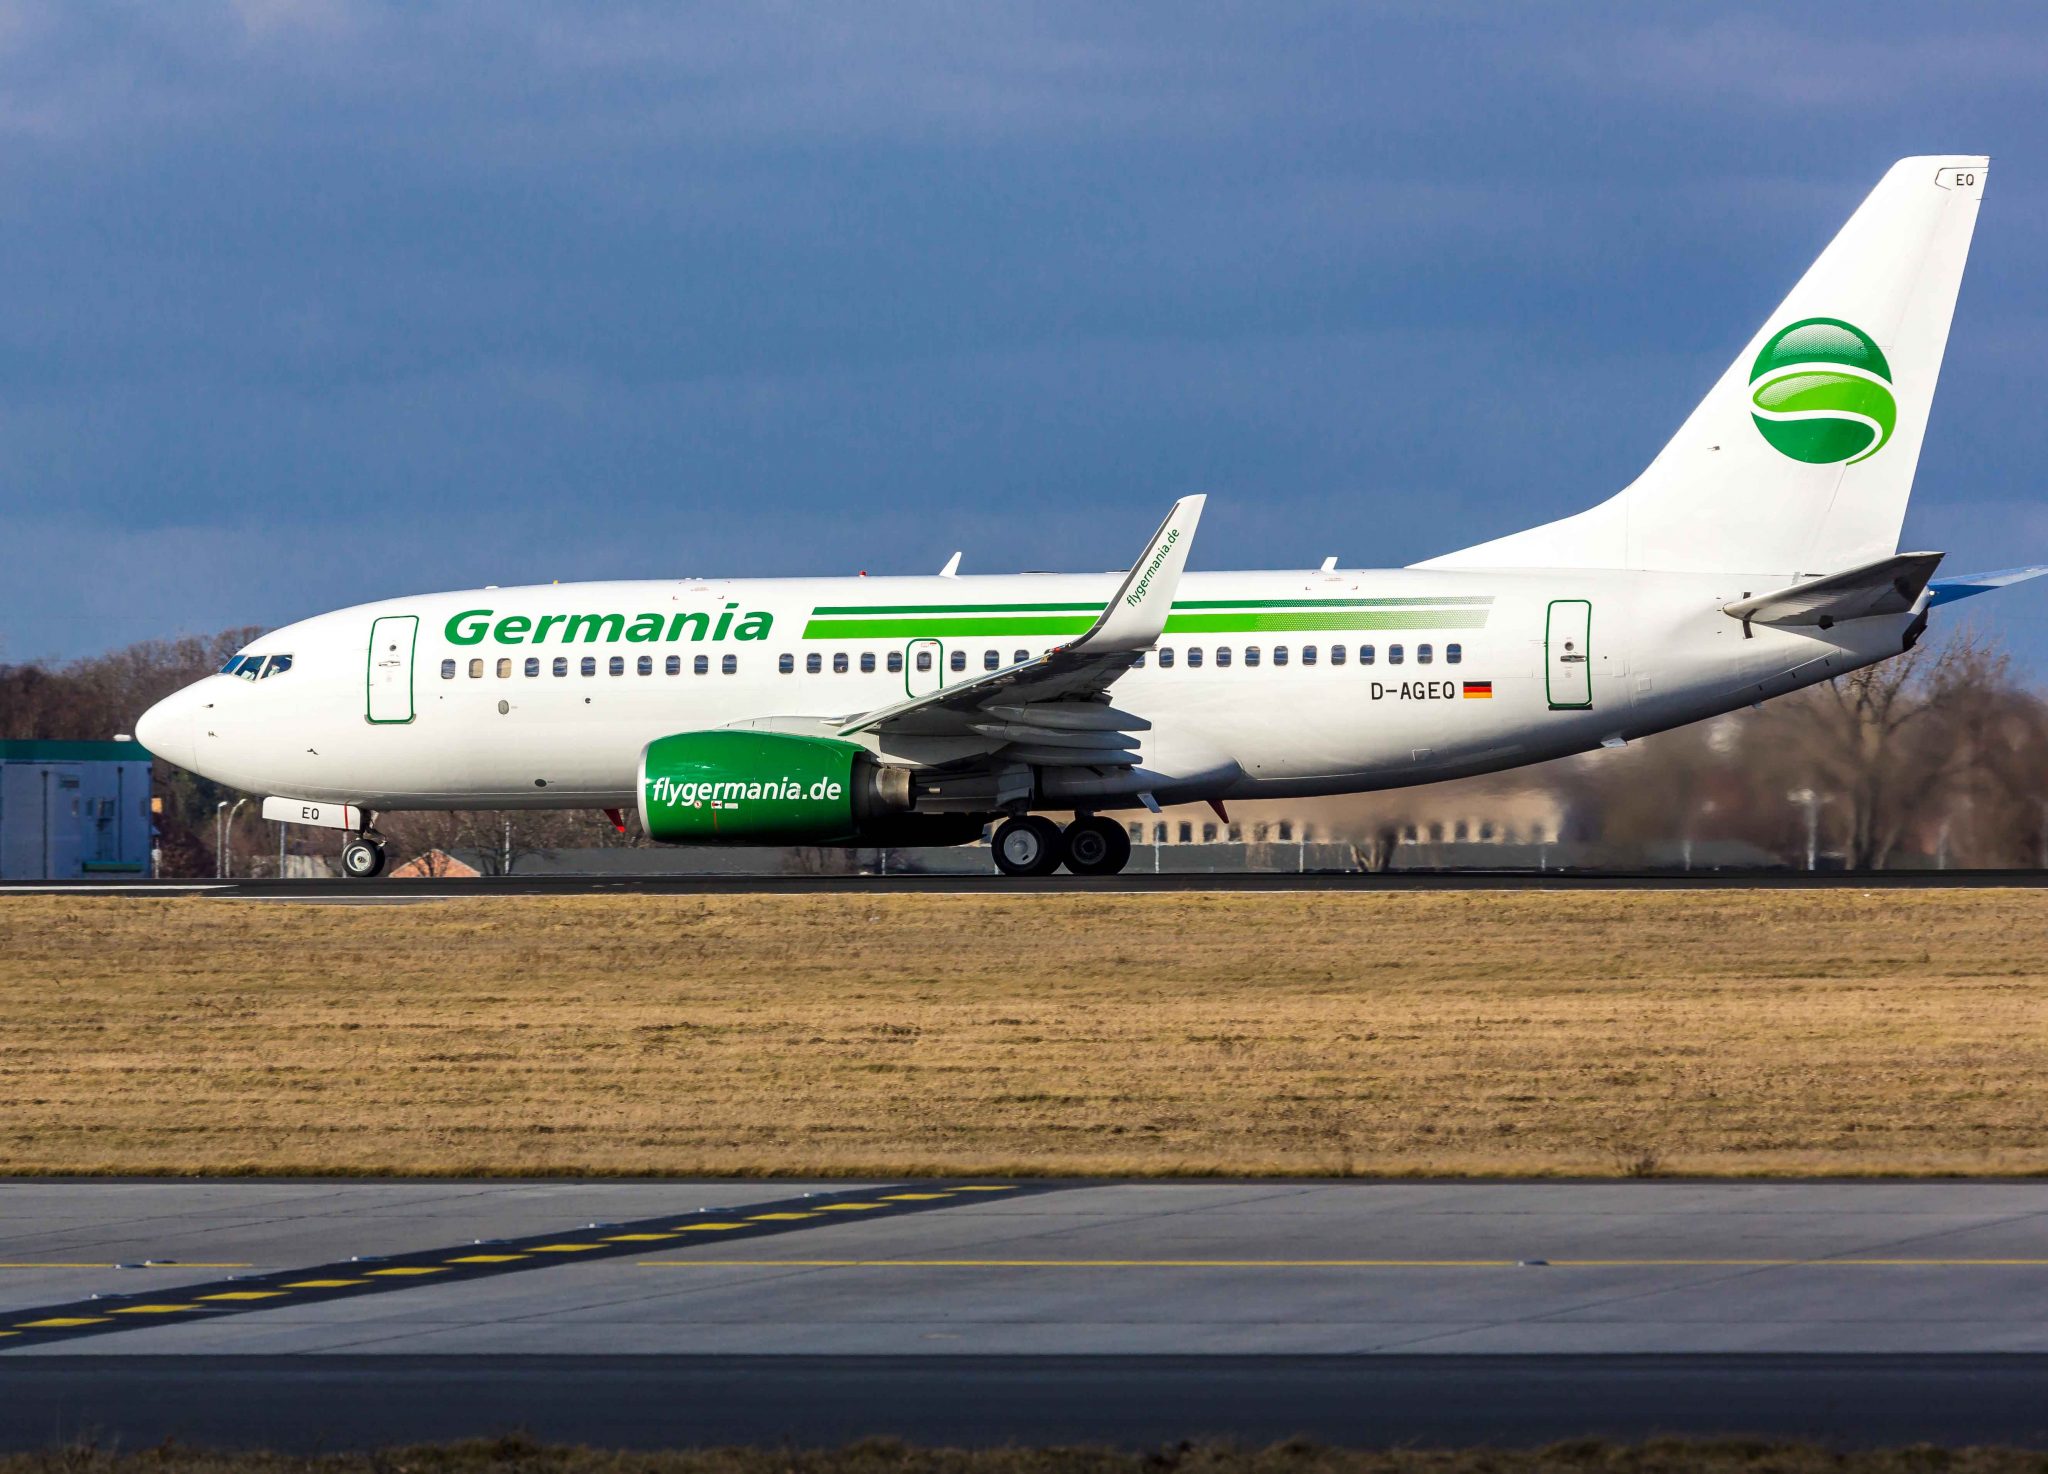 Germania bases third aircraft in Dresden and adds flight to Athens